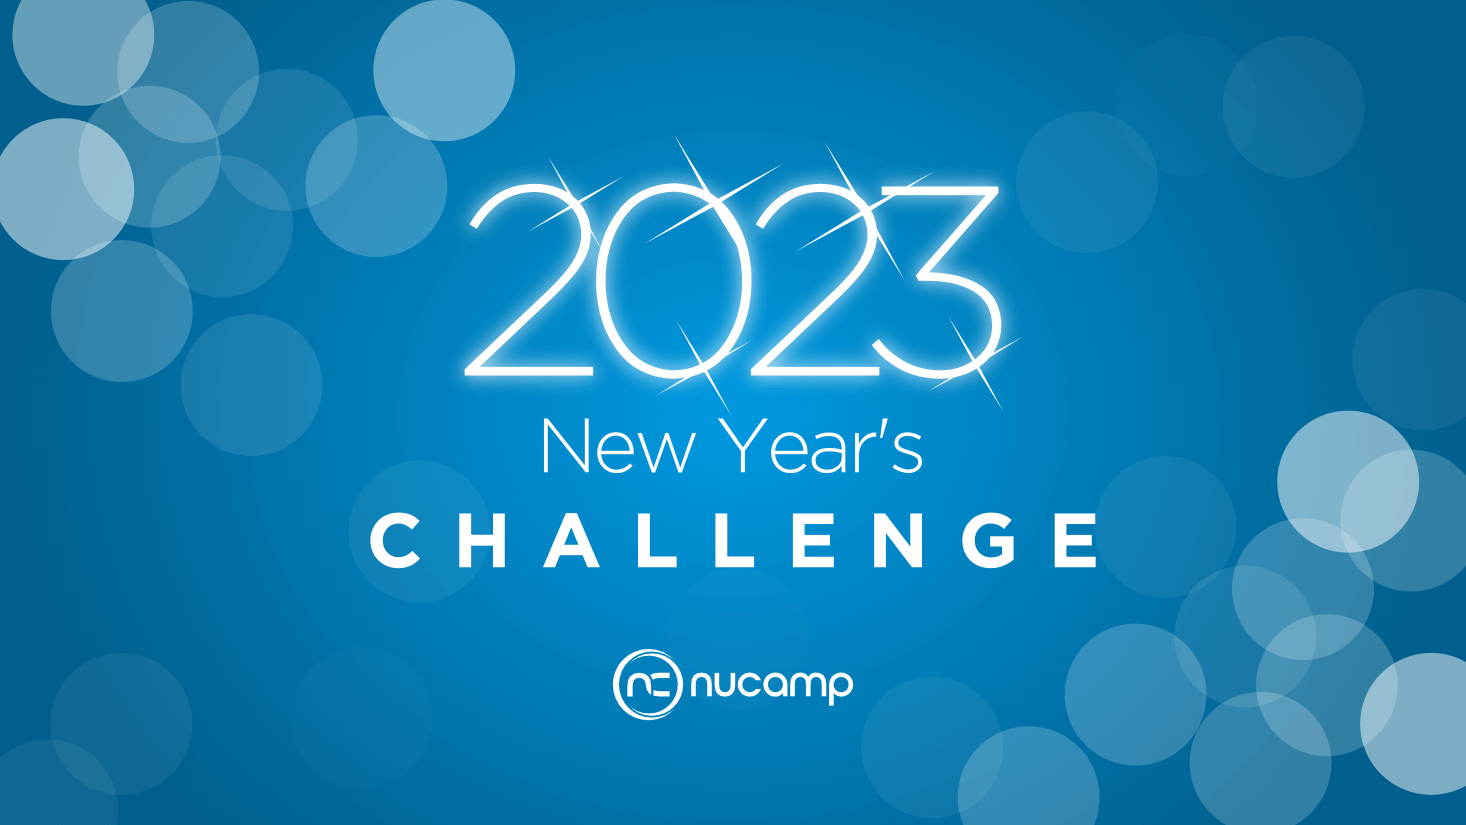 2023 New Years Coding Bootcamp Challenge. Get 15% off the cost of tuition when you complete the challenge.